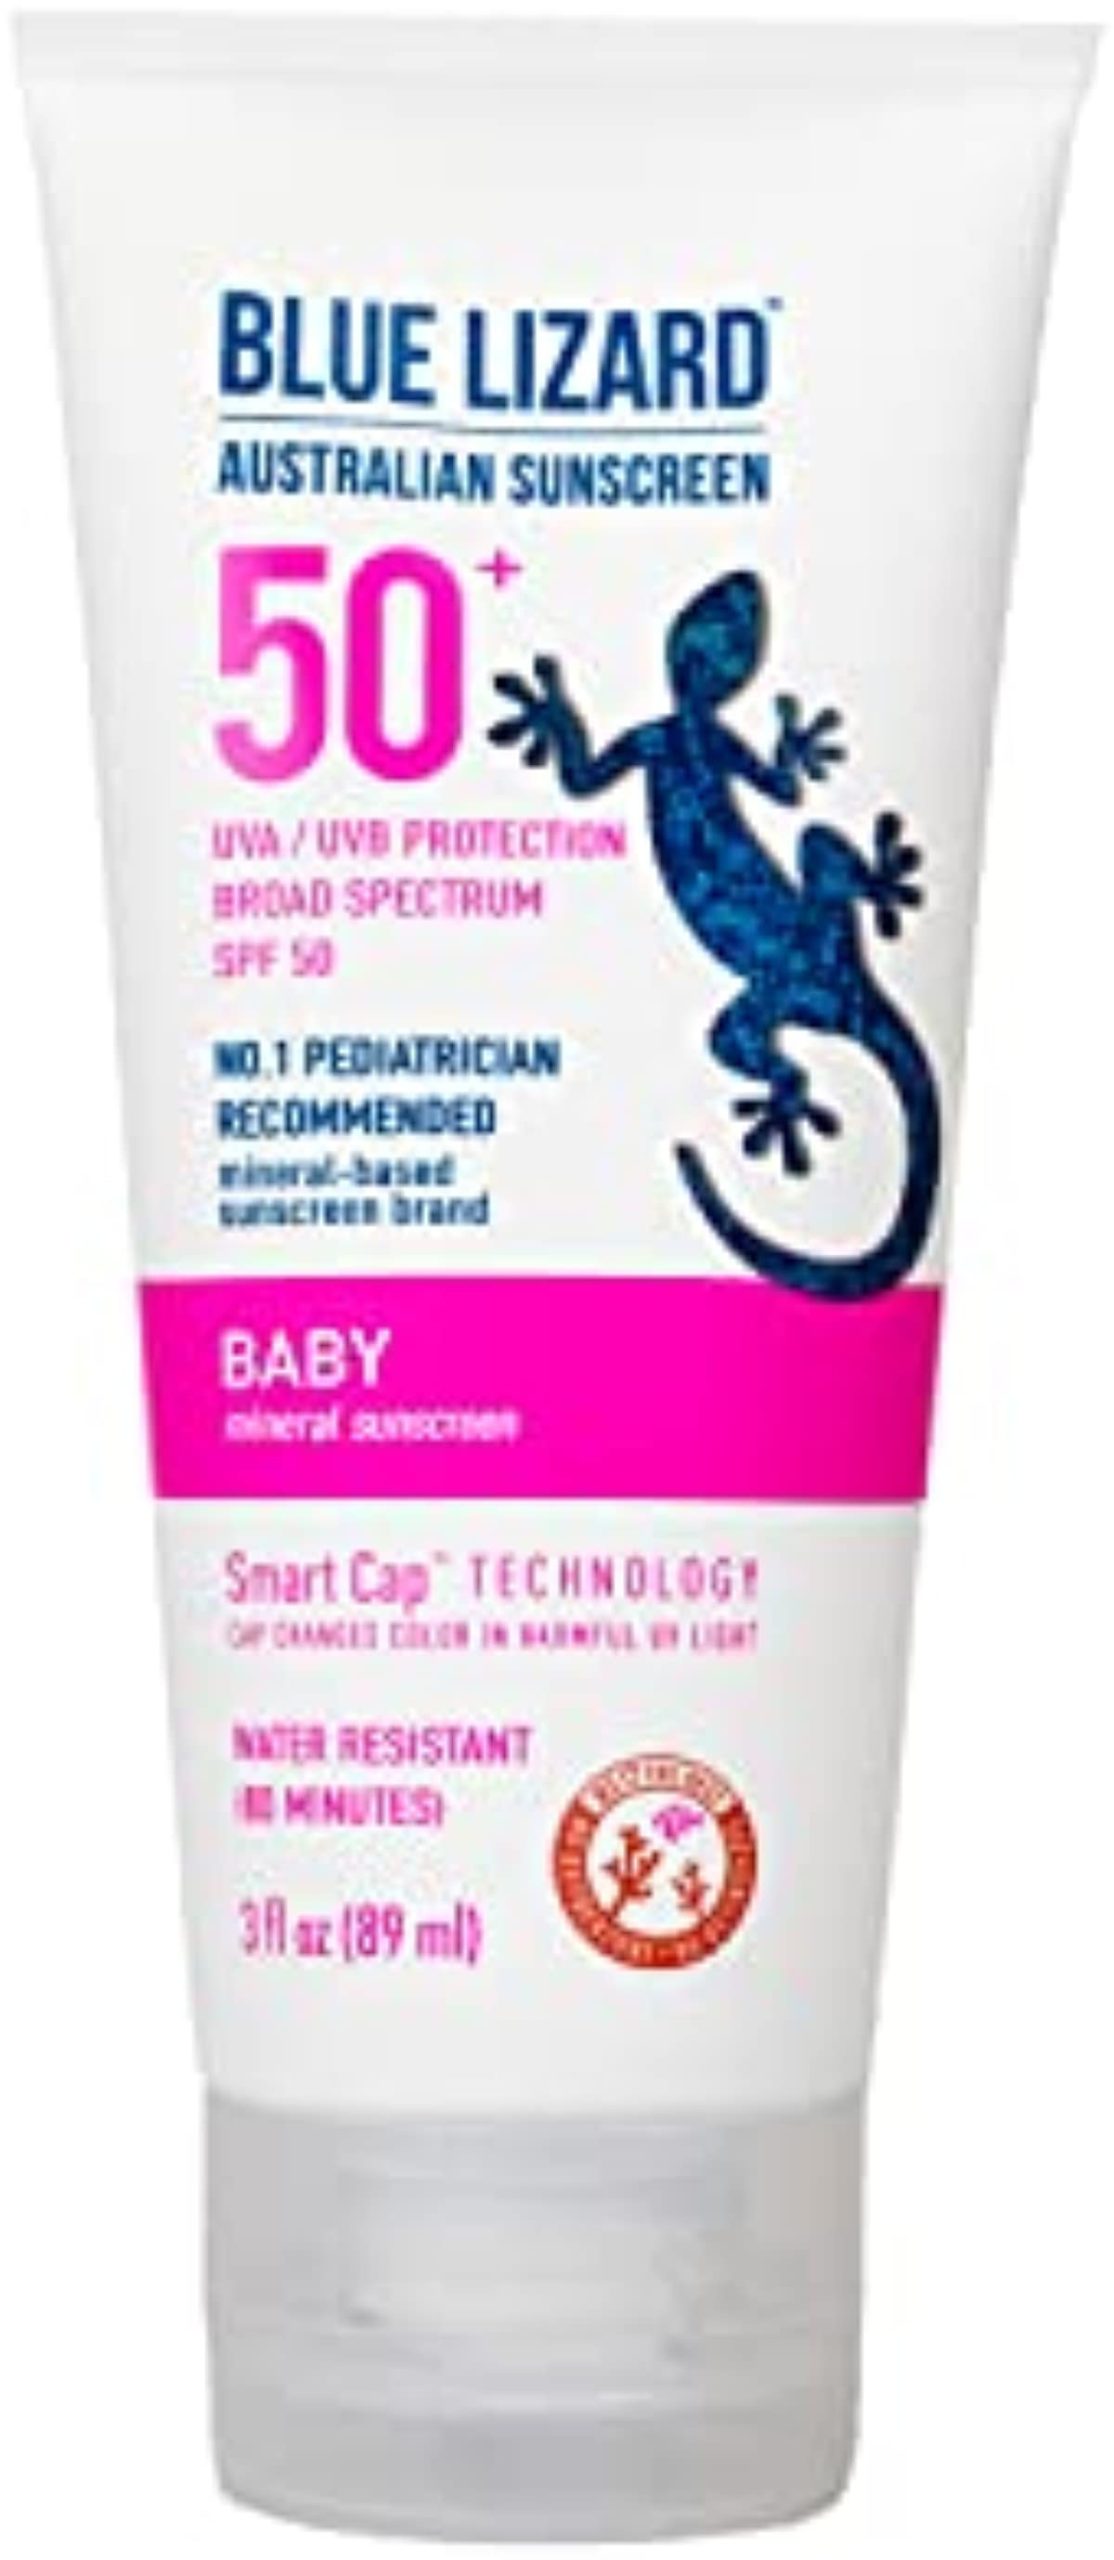 BLUE LIZARD Baby Mineral Sunscreen with Zinc Oxide, SPF 50+, Water Resistant, UVA/UVB Protection with Smart Cap Technology - Fragrance Free, 3 Ounce Tube